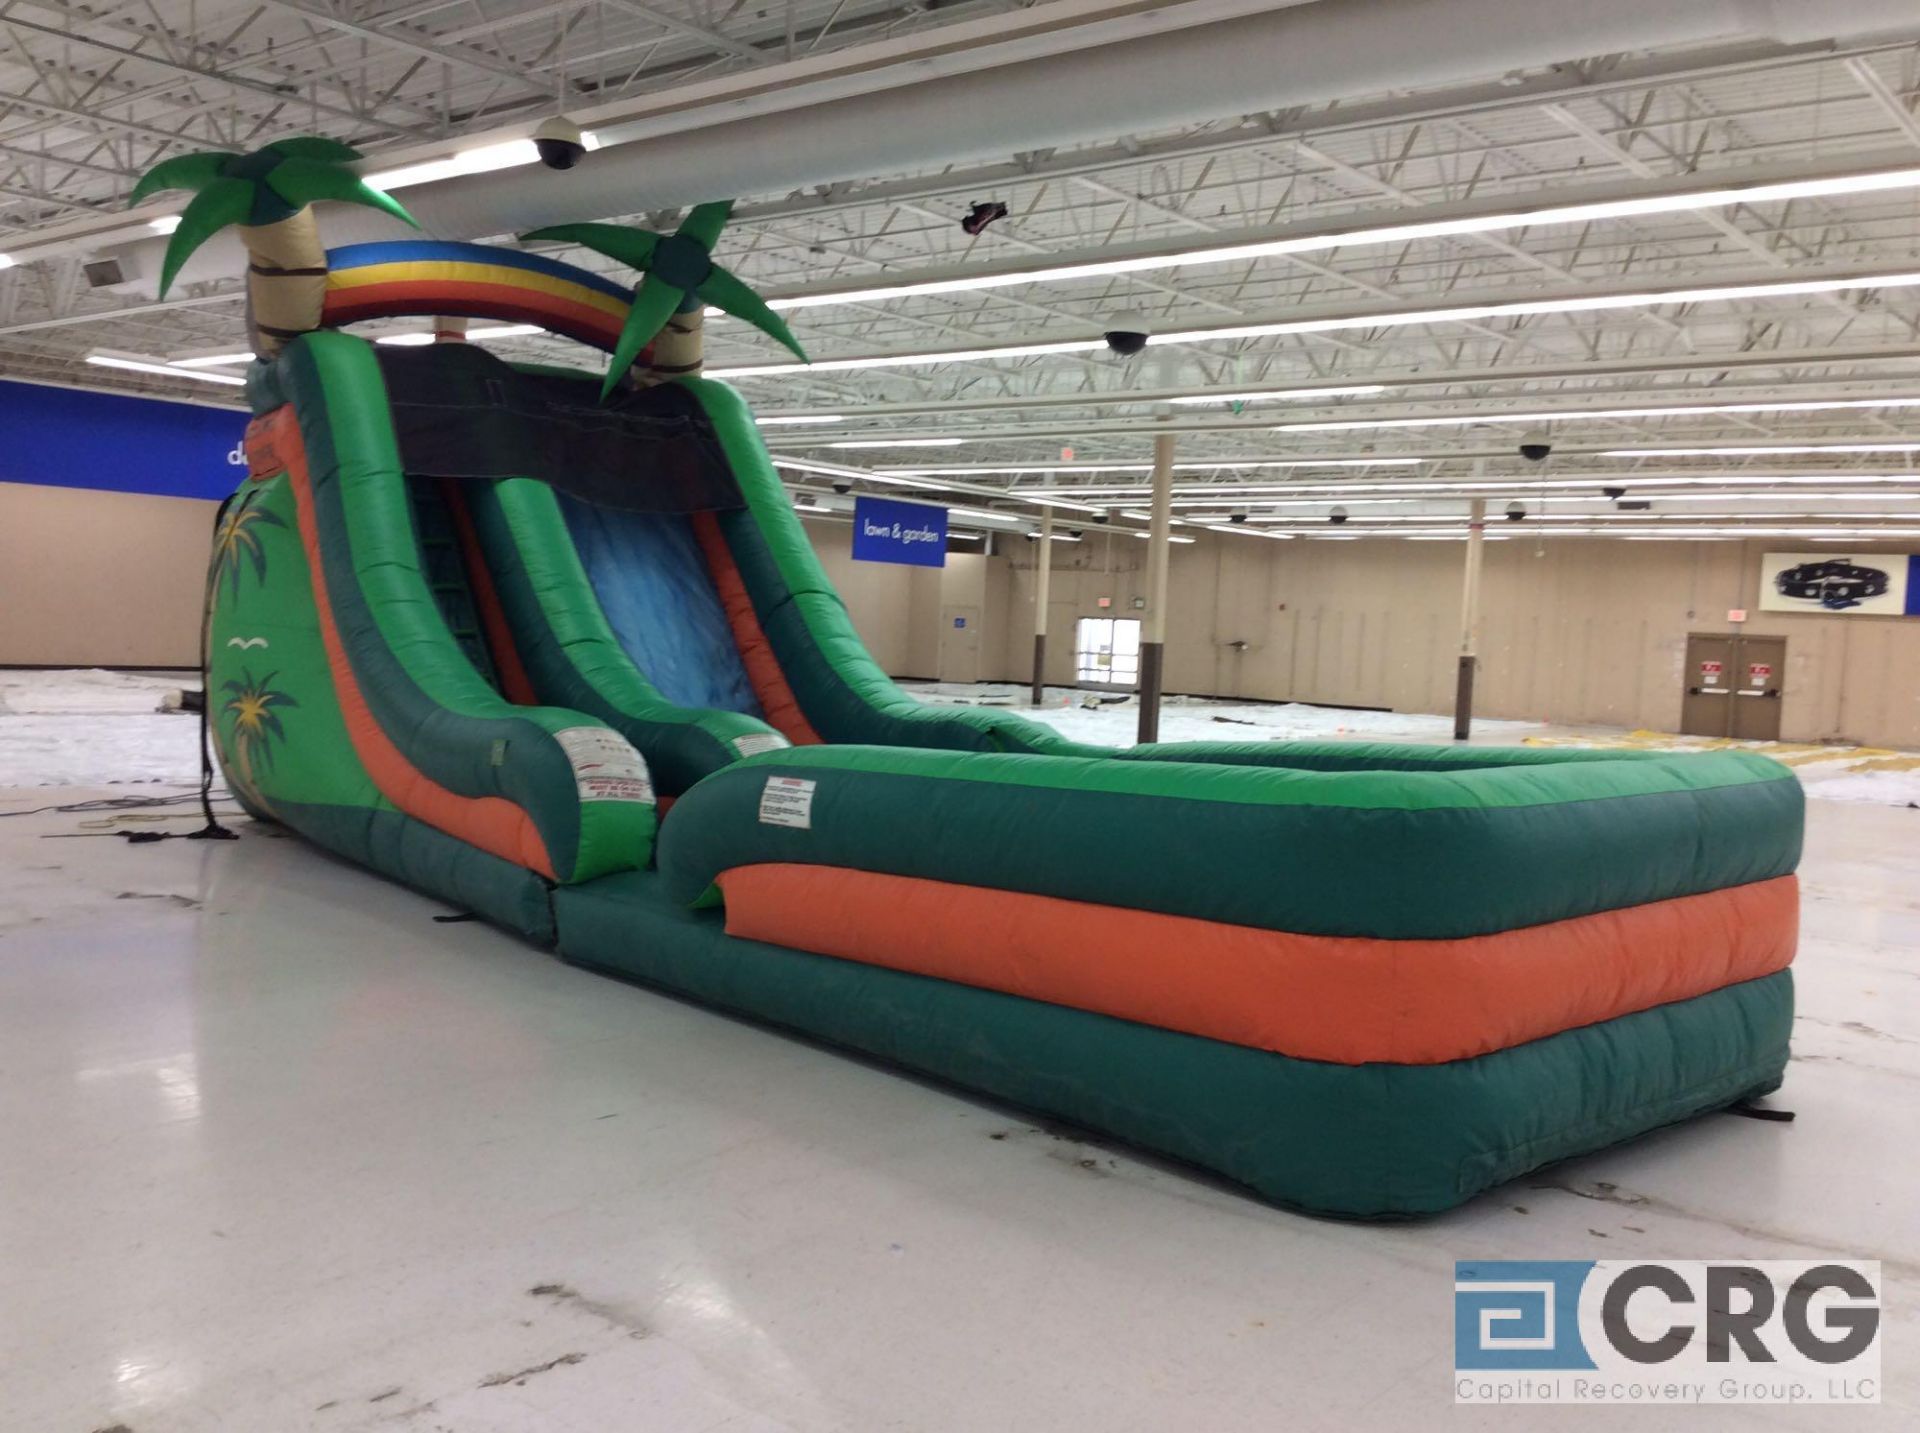 Water Slide, 2 piece, Inflatable bounce house, blower NOT included.